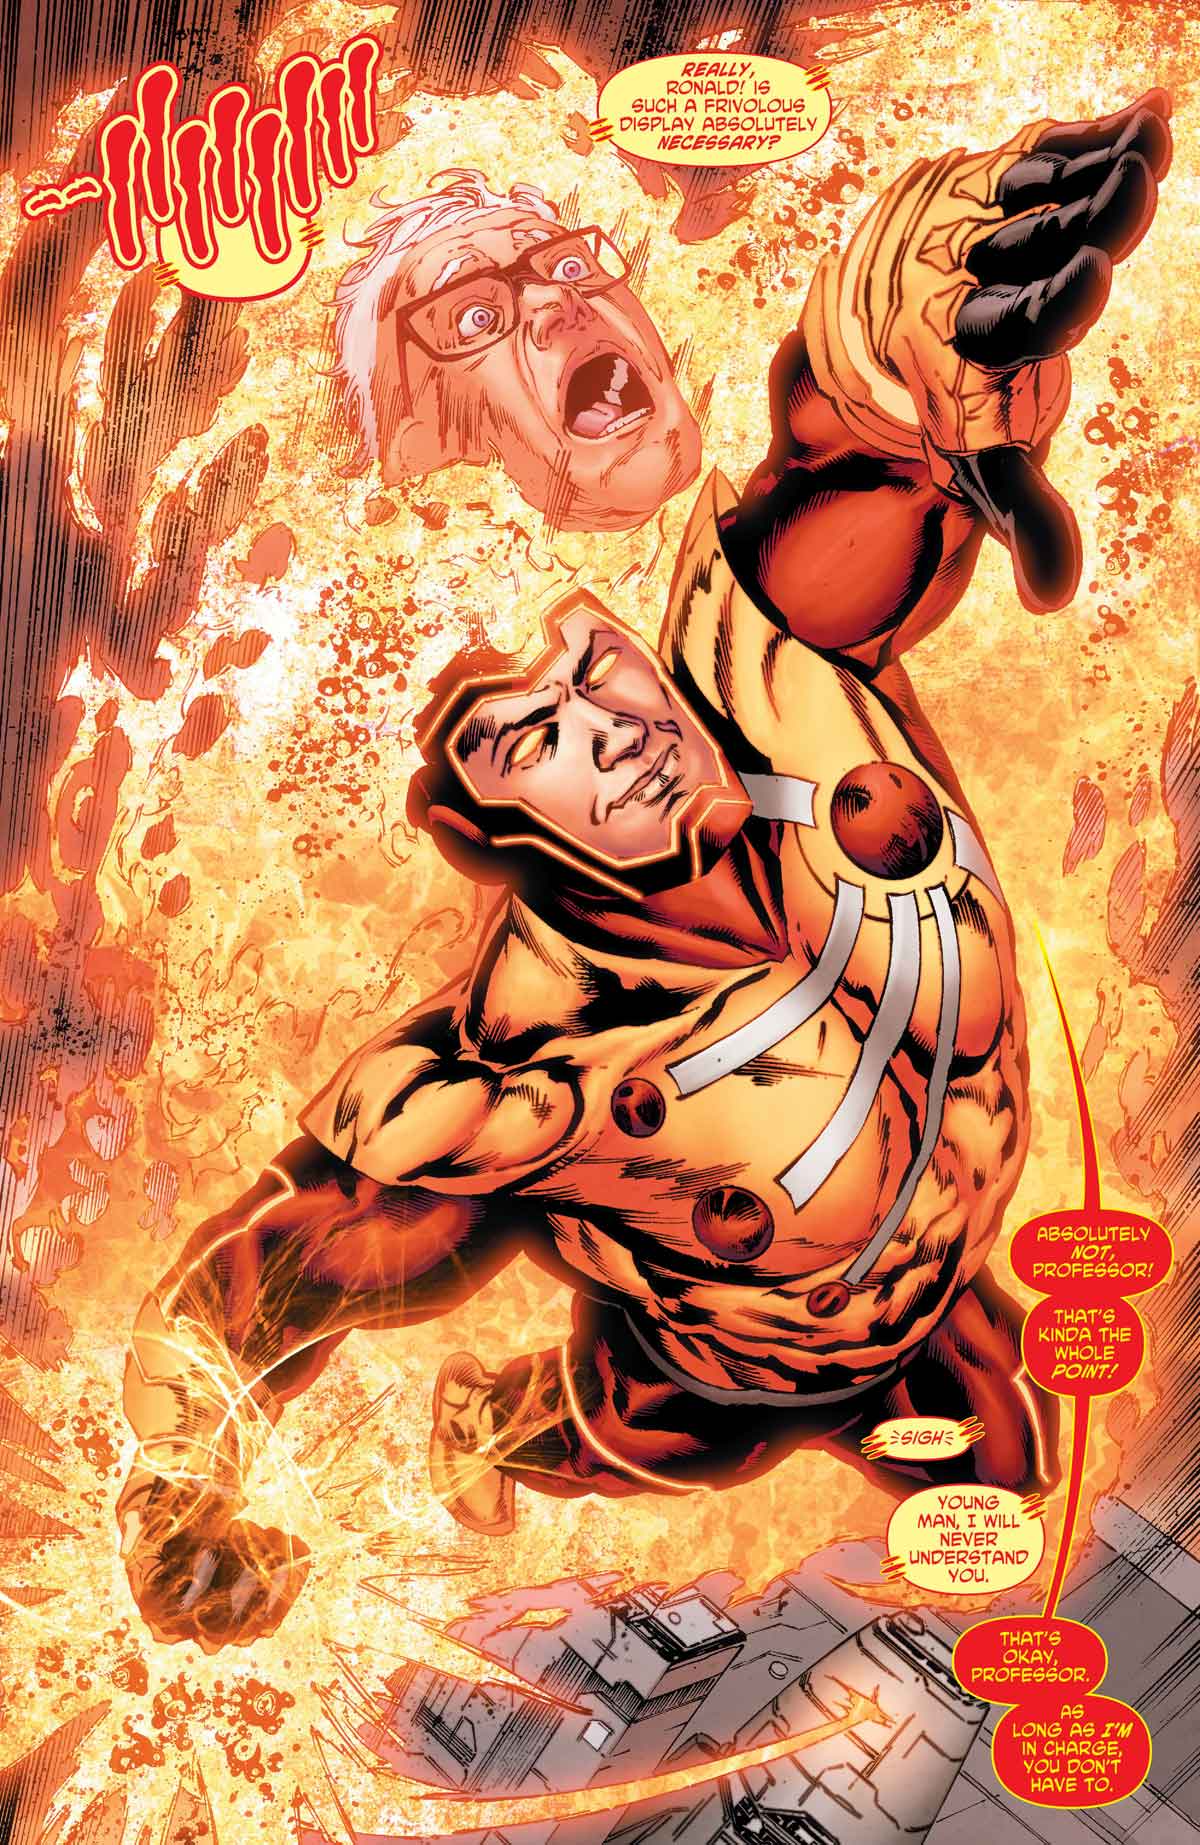 Firestorm in Legends of Tomorrow #5 by Gerry Conway, Eduardo Pansica, Rob Hunter, and more